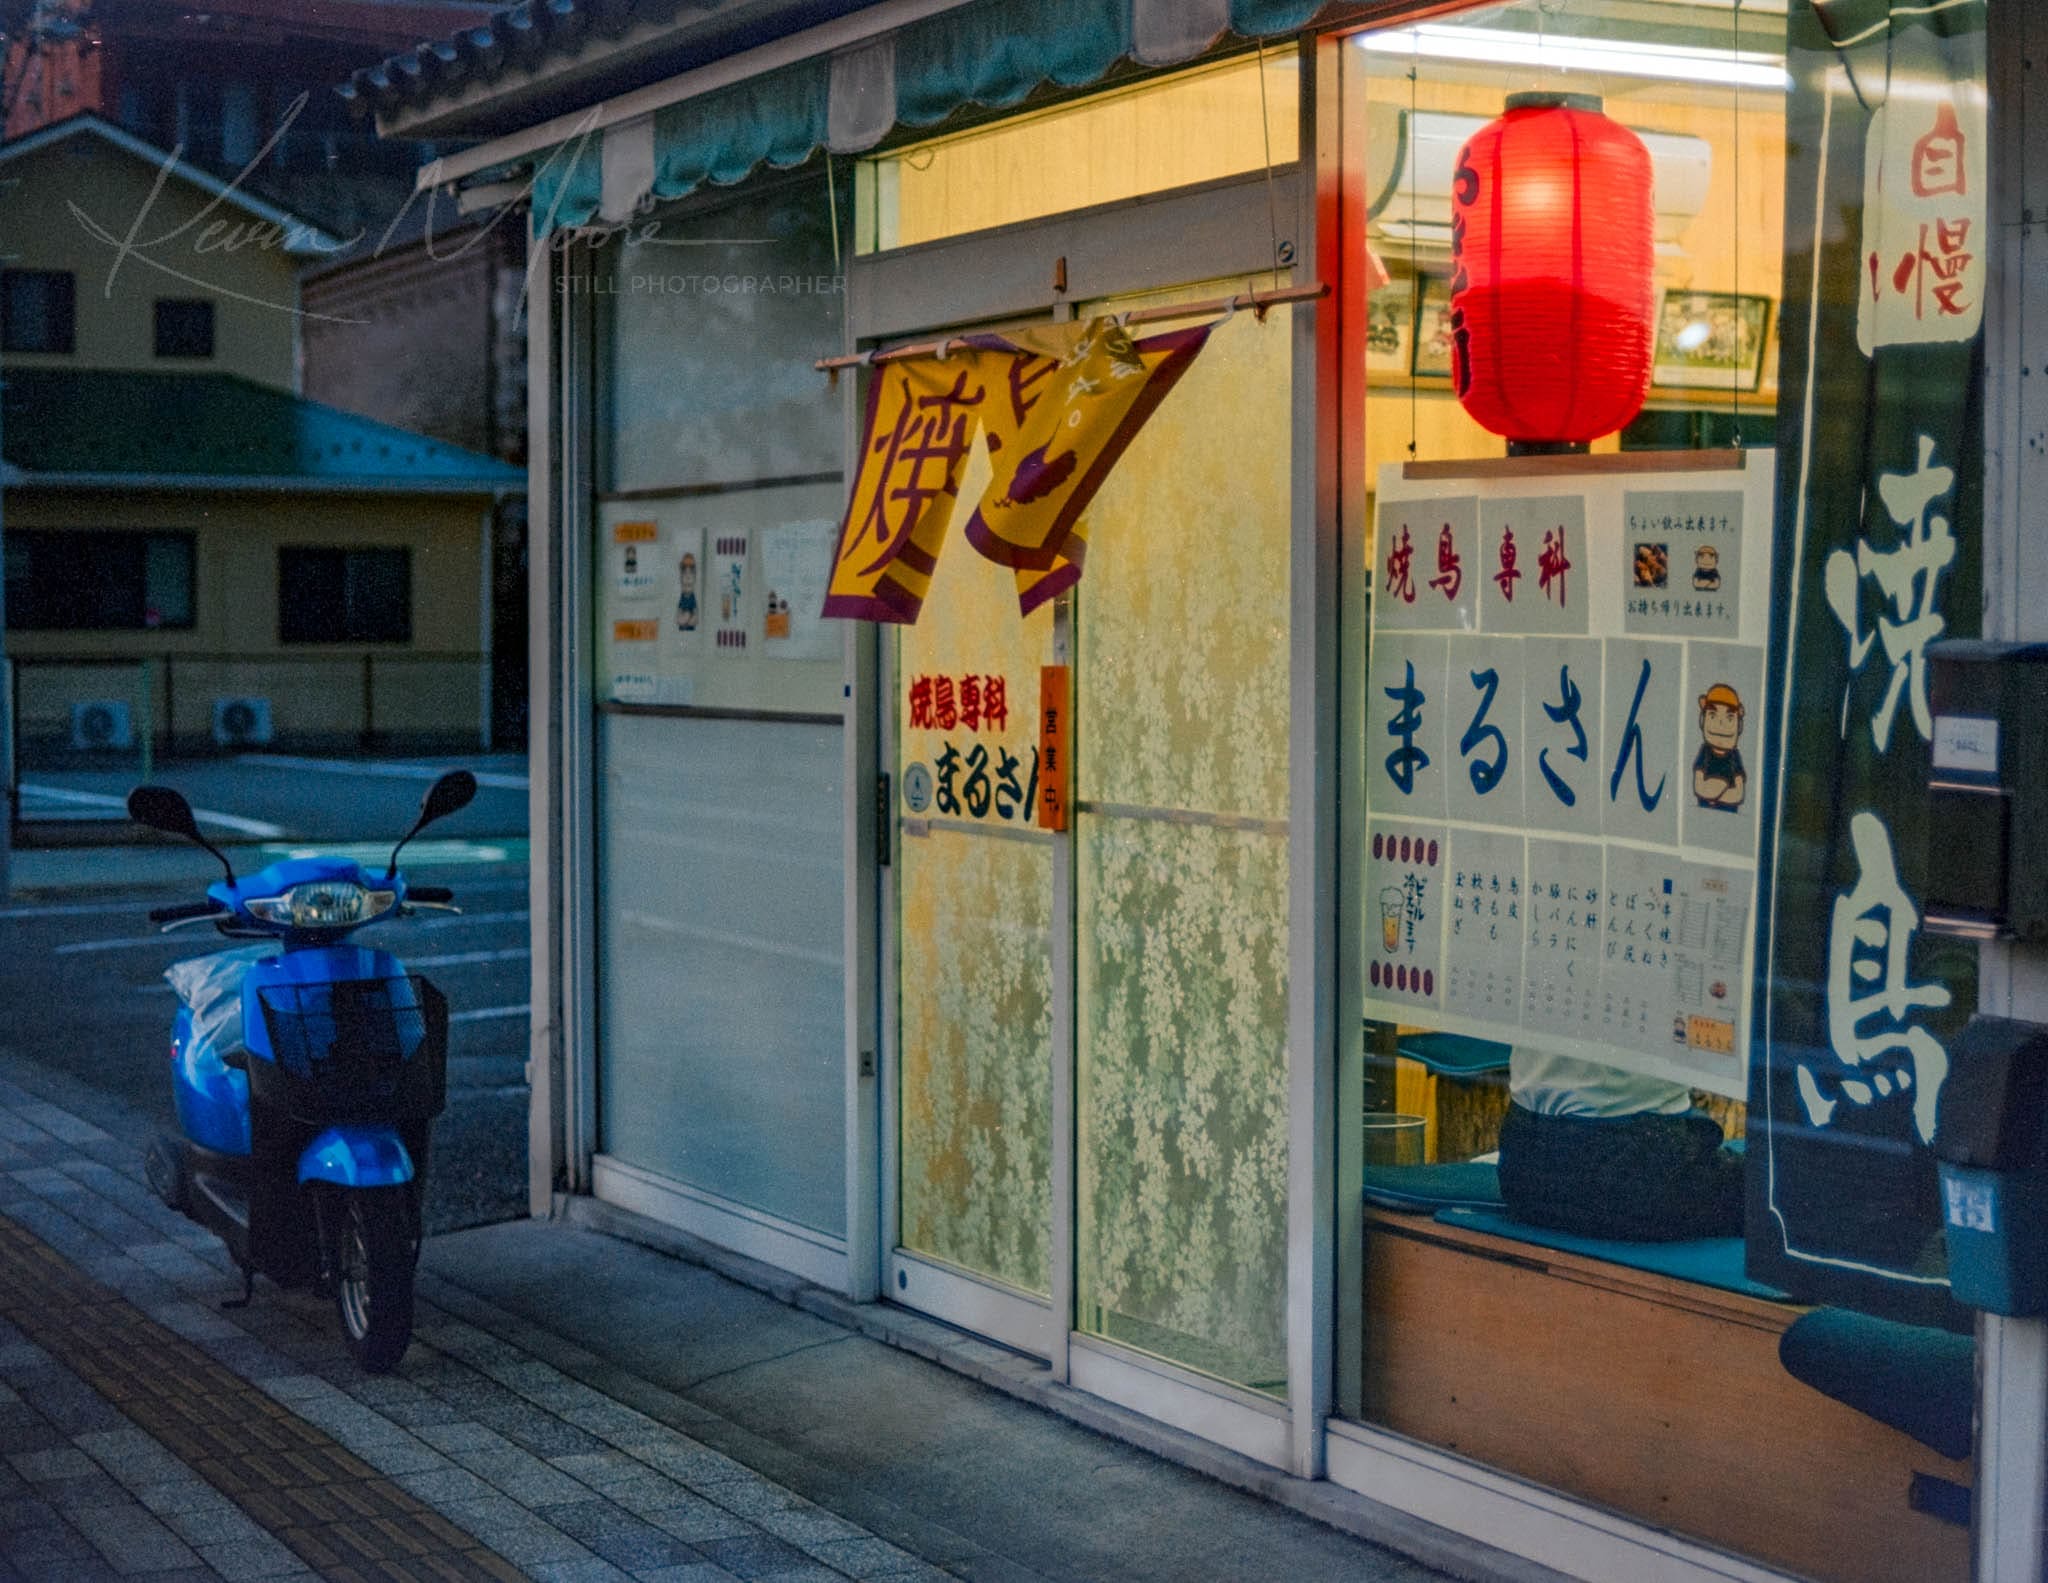 Traditional Japanese restaurant at dusk, marked by a glowing red lantern and parked motorbike.